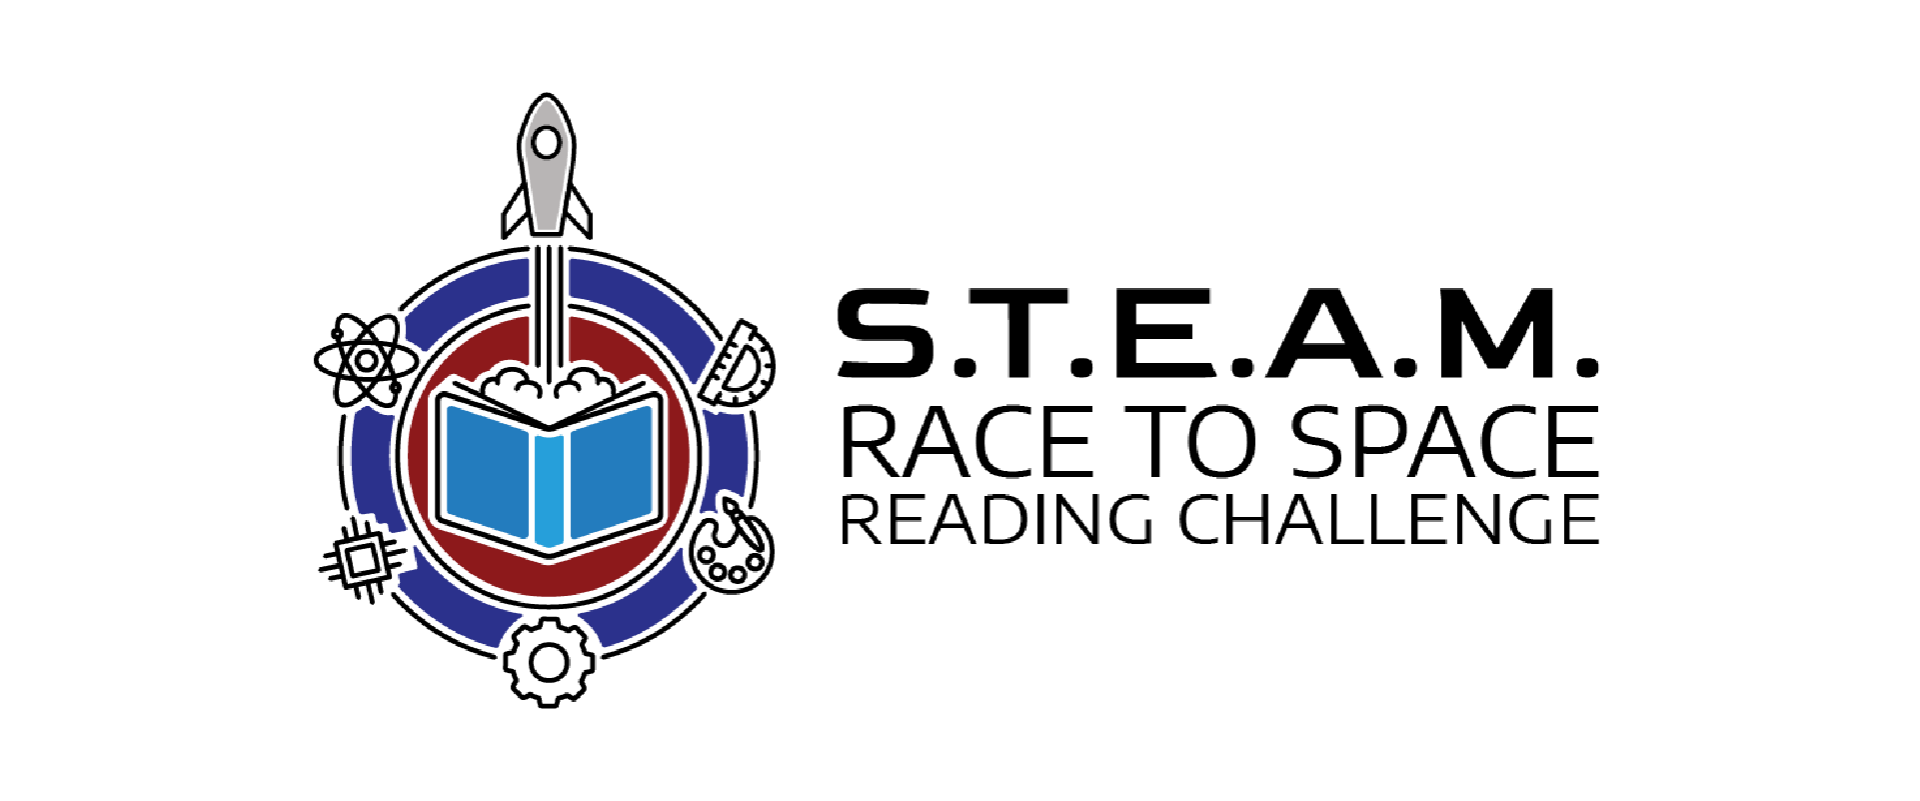 S.T.E.A.M. Race to Space Reading Challenge logo.